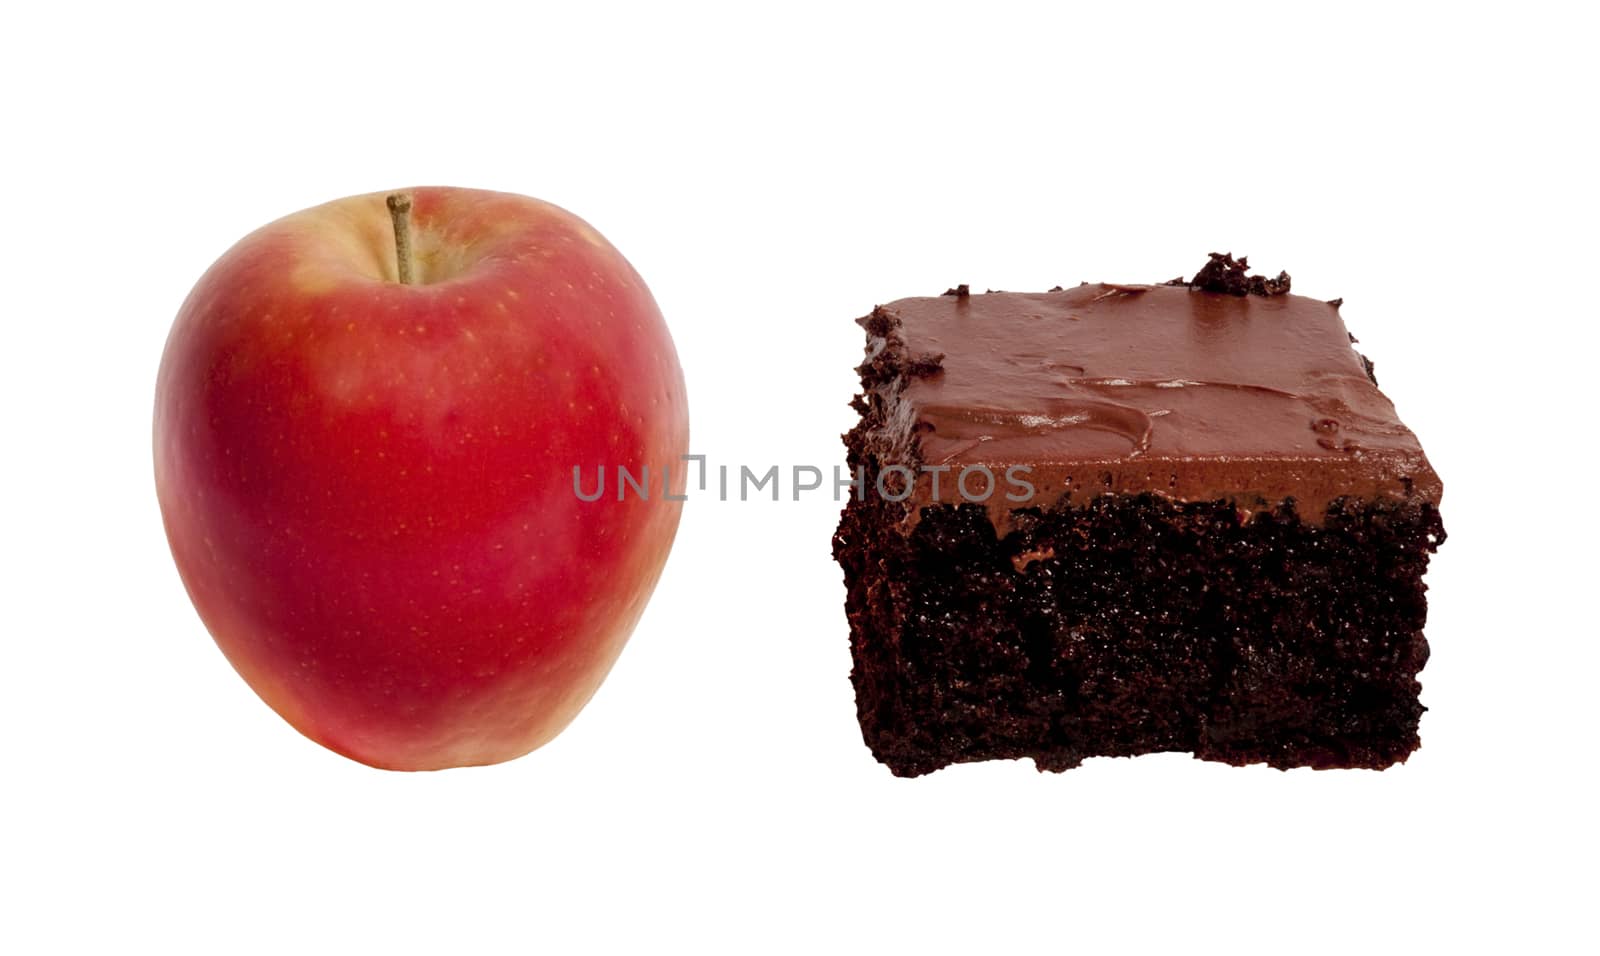 Healthy Apple Or Chocolate Cake by stockbuster1